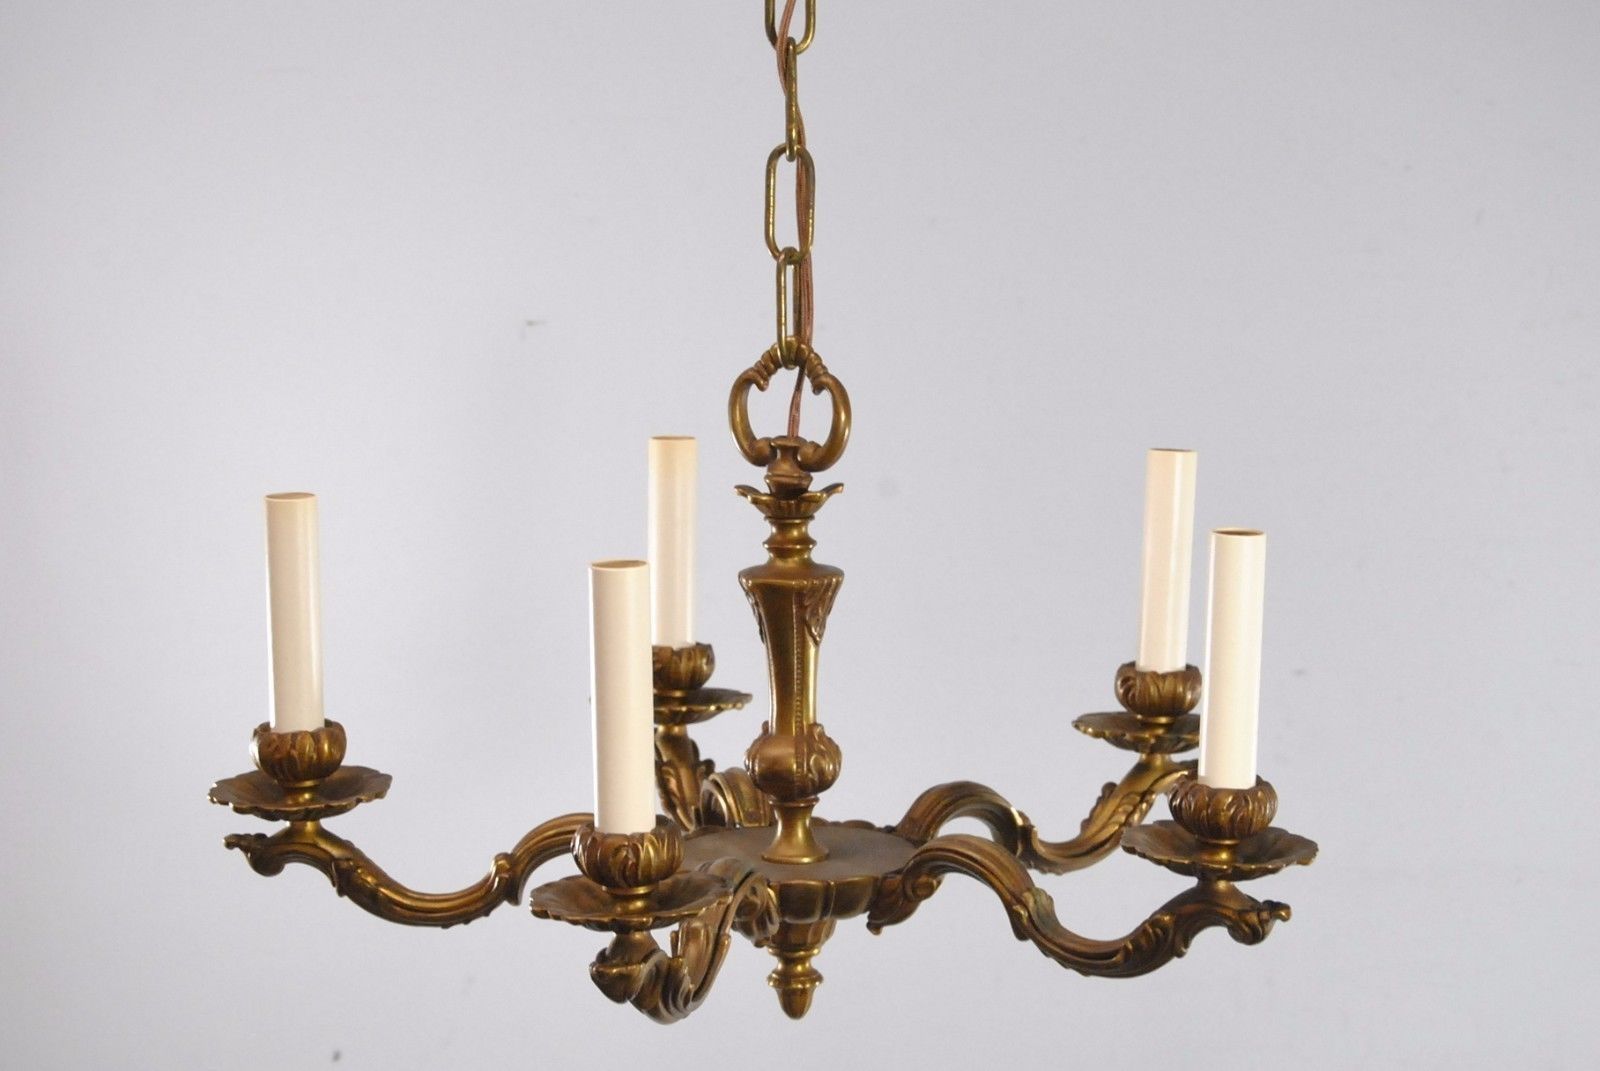 Antique Five Arm French Style Chandelier Lefflers Antiques Inside French Style Chandelier (View 3 of 12)